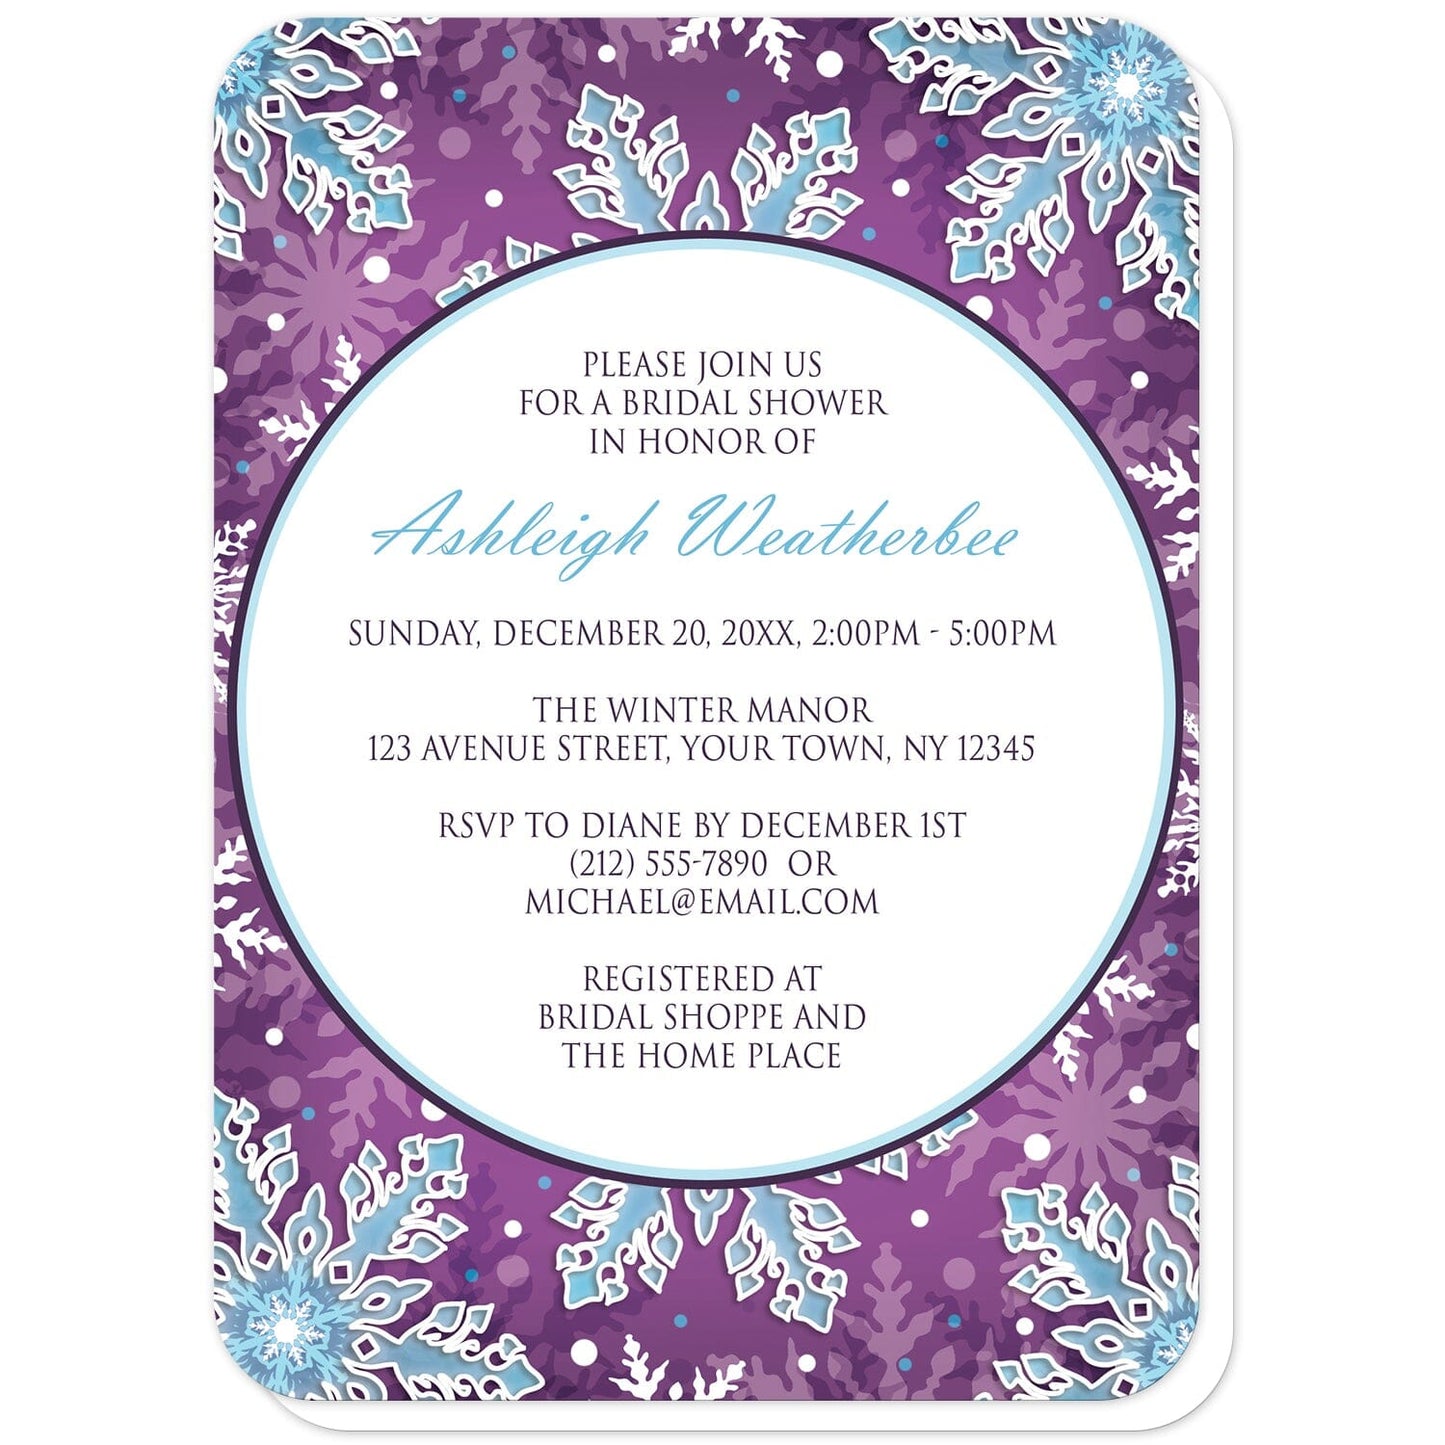 Modern Purple Blue Snowflake Bridal Shower Invitations (with rounded corners) at Artistically Invited. Modern purple blue snowflake bridal shower invitations with your personalized bridal shower celebration details custom printed in blue and purple in a white circle over a royal purple background covered in ornate white and blue snowflakes.